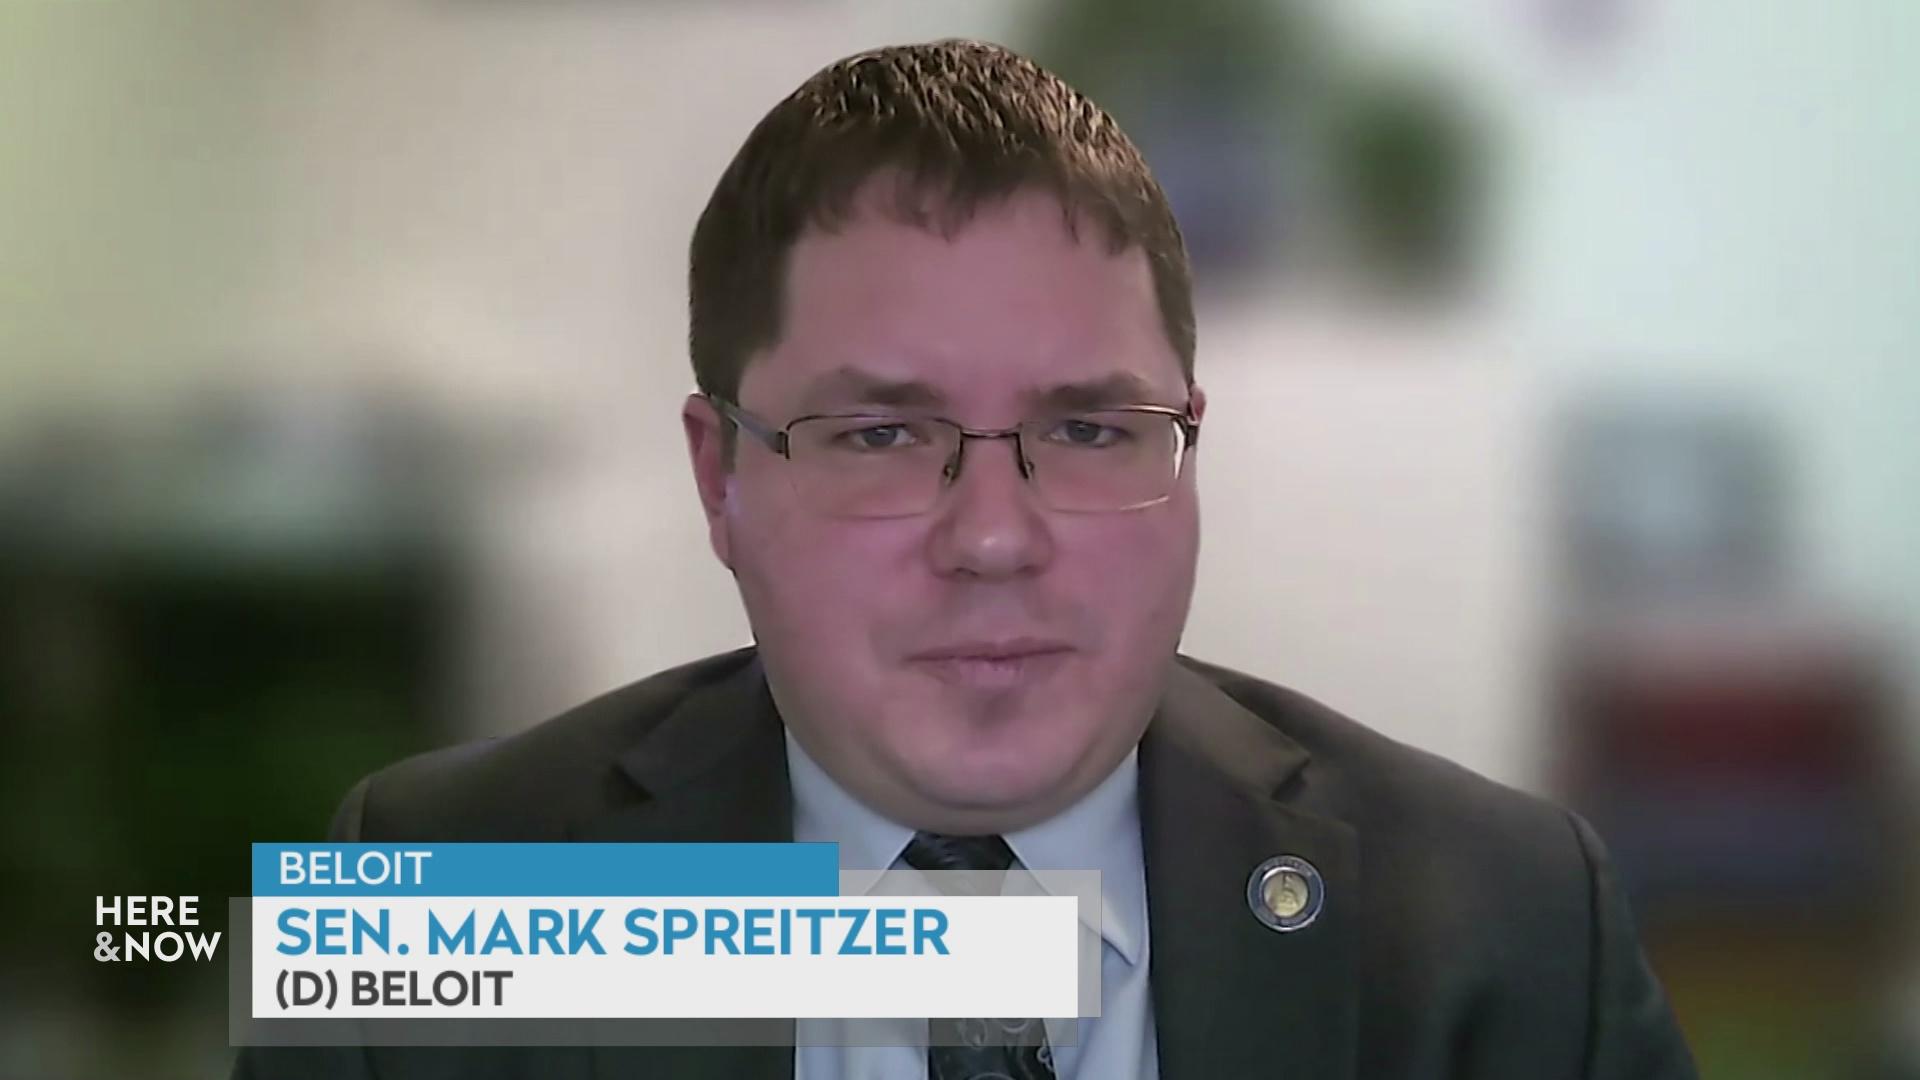 A still image from a video shows Mark Spreitzer seated in front of a blurred background with a graphic at bottom reading 'Beloit,' 'Mark Spreitzer' and '(D) Beloit.'